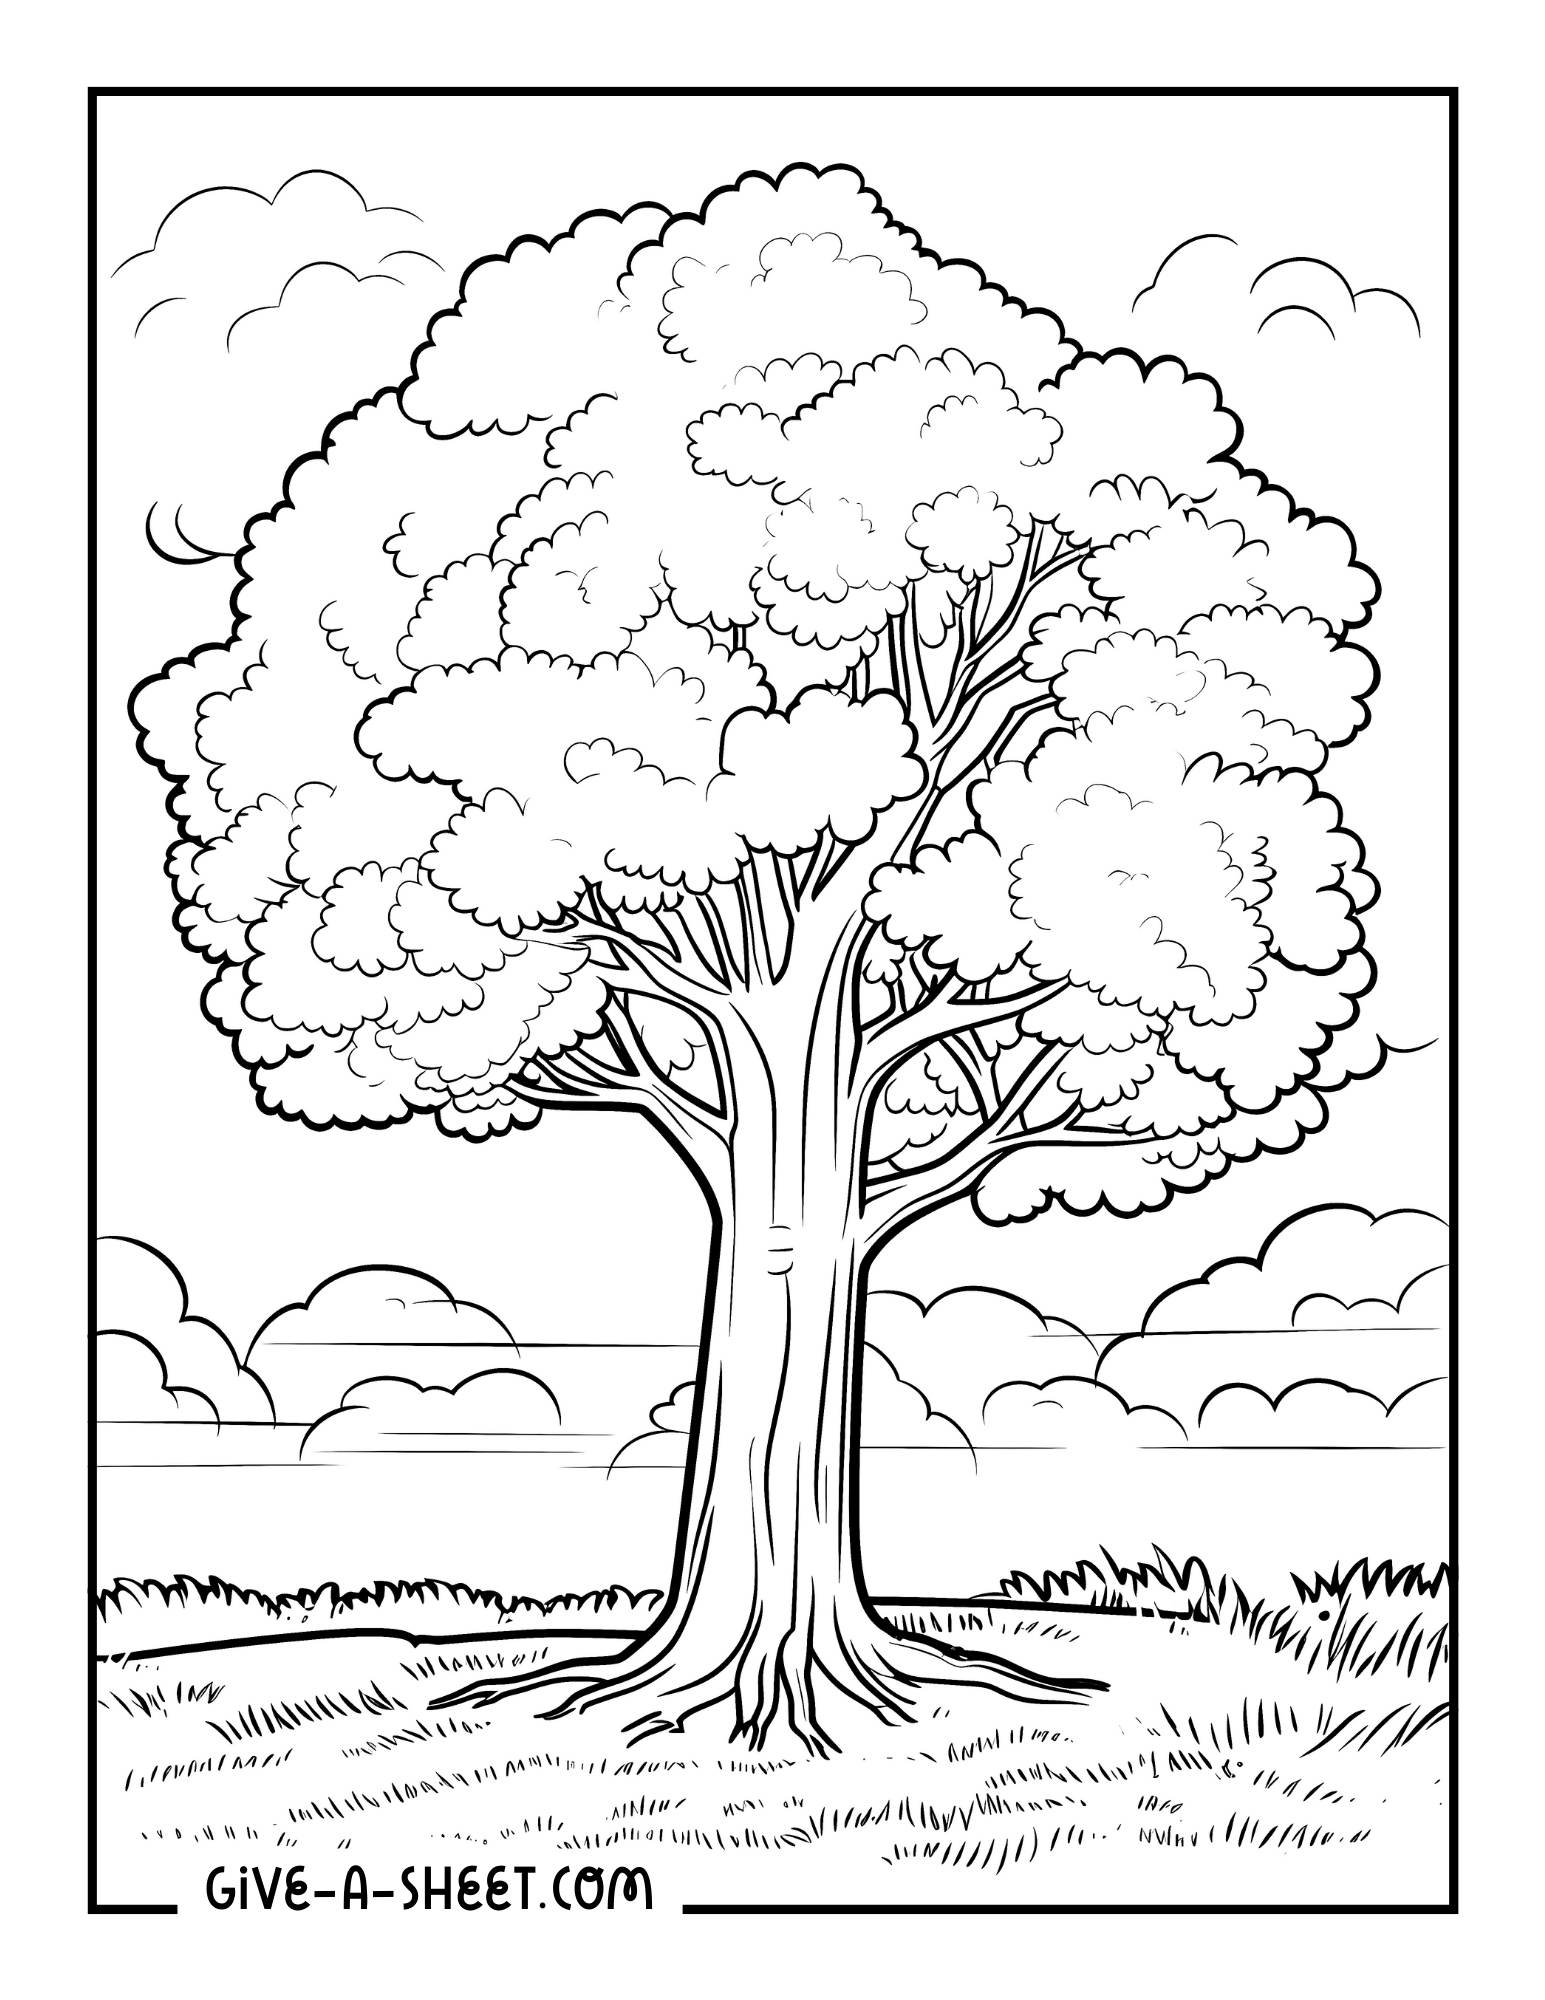 Realistic oak tree coloring page.